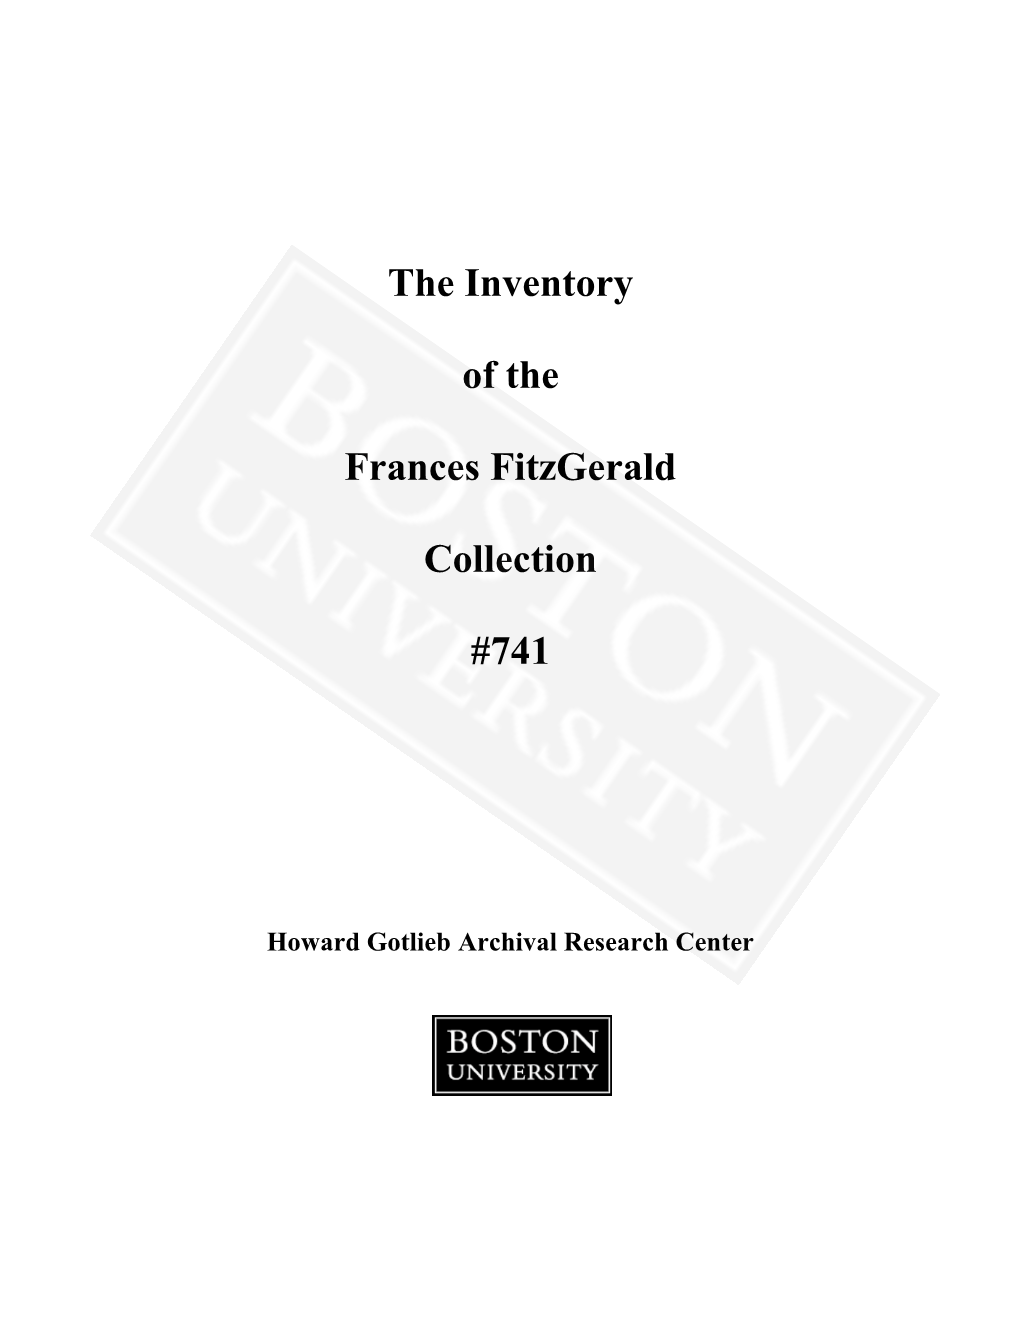 The Inventory of the Frances Fitzgerald Collection #741